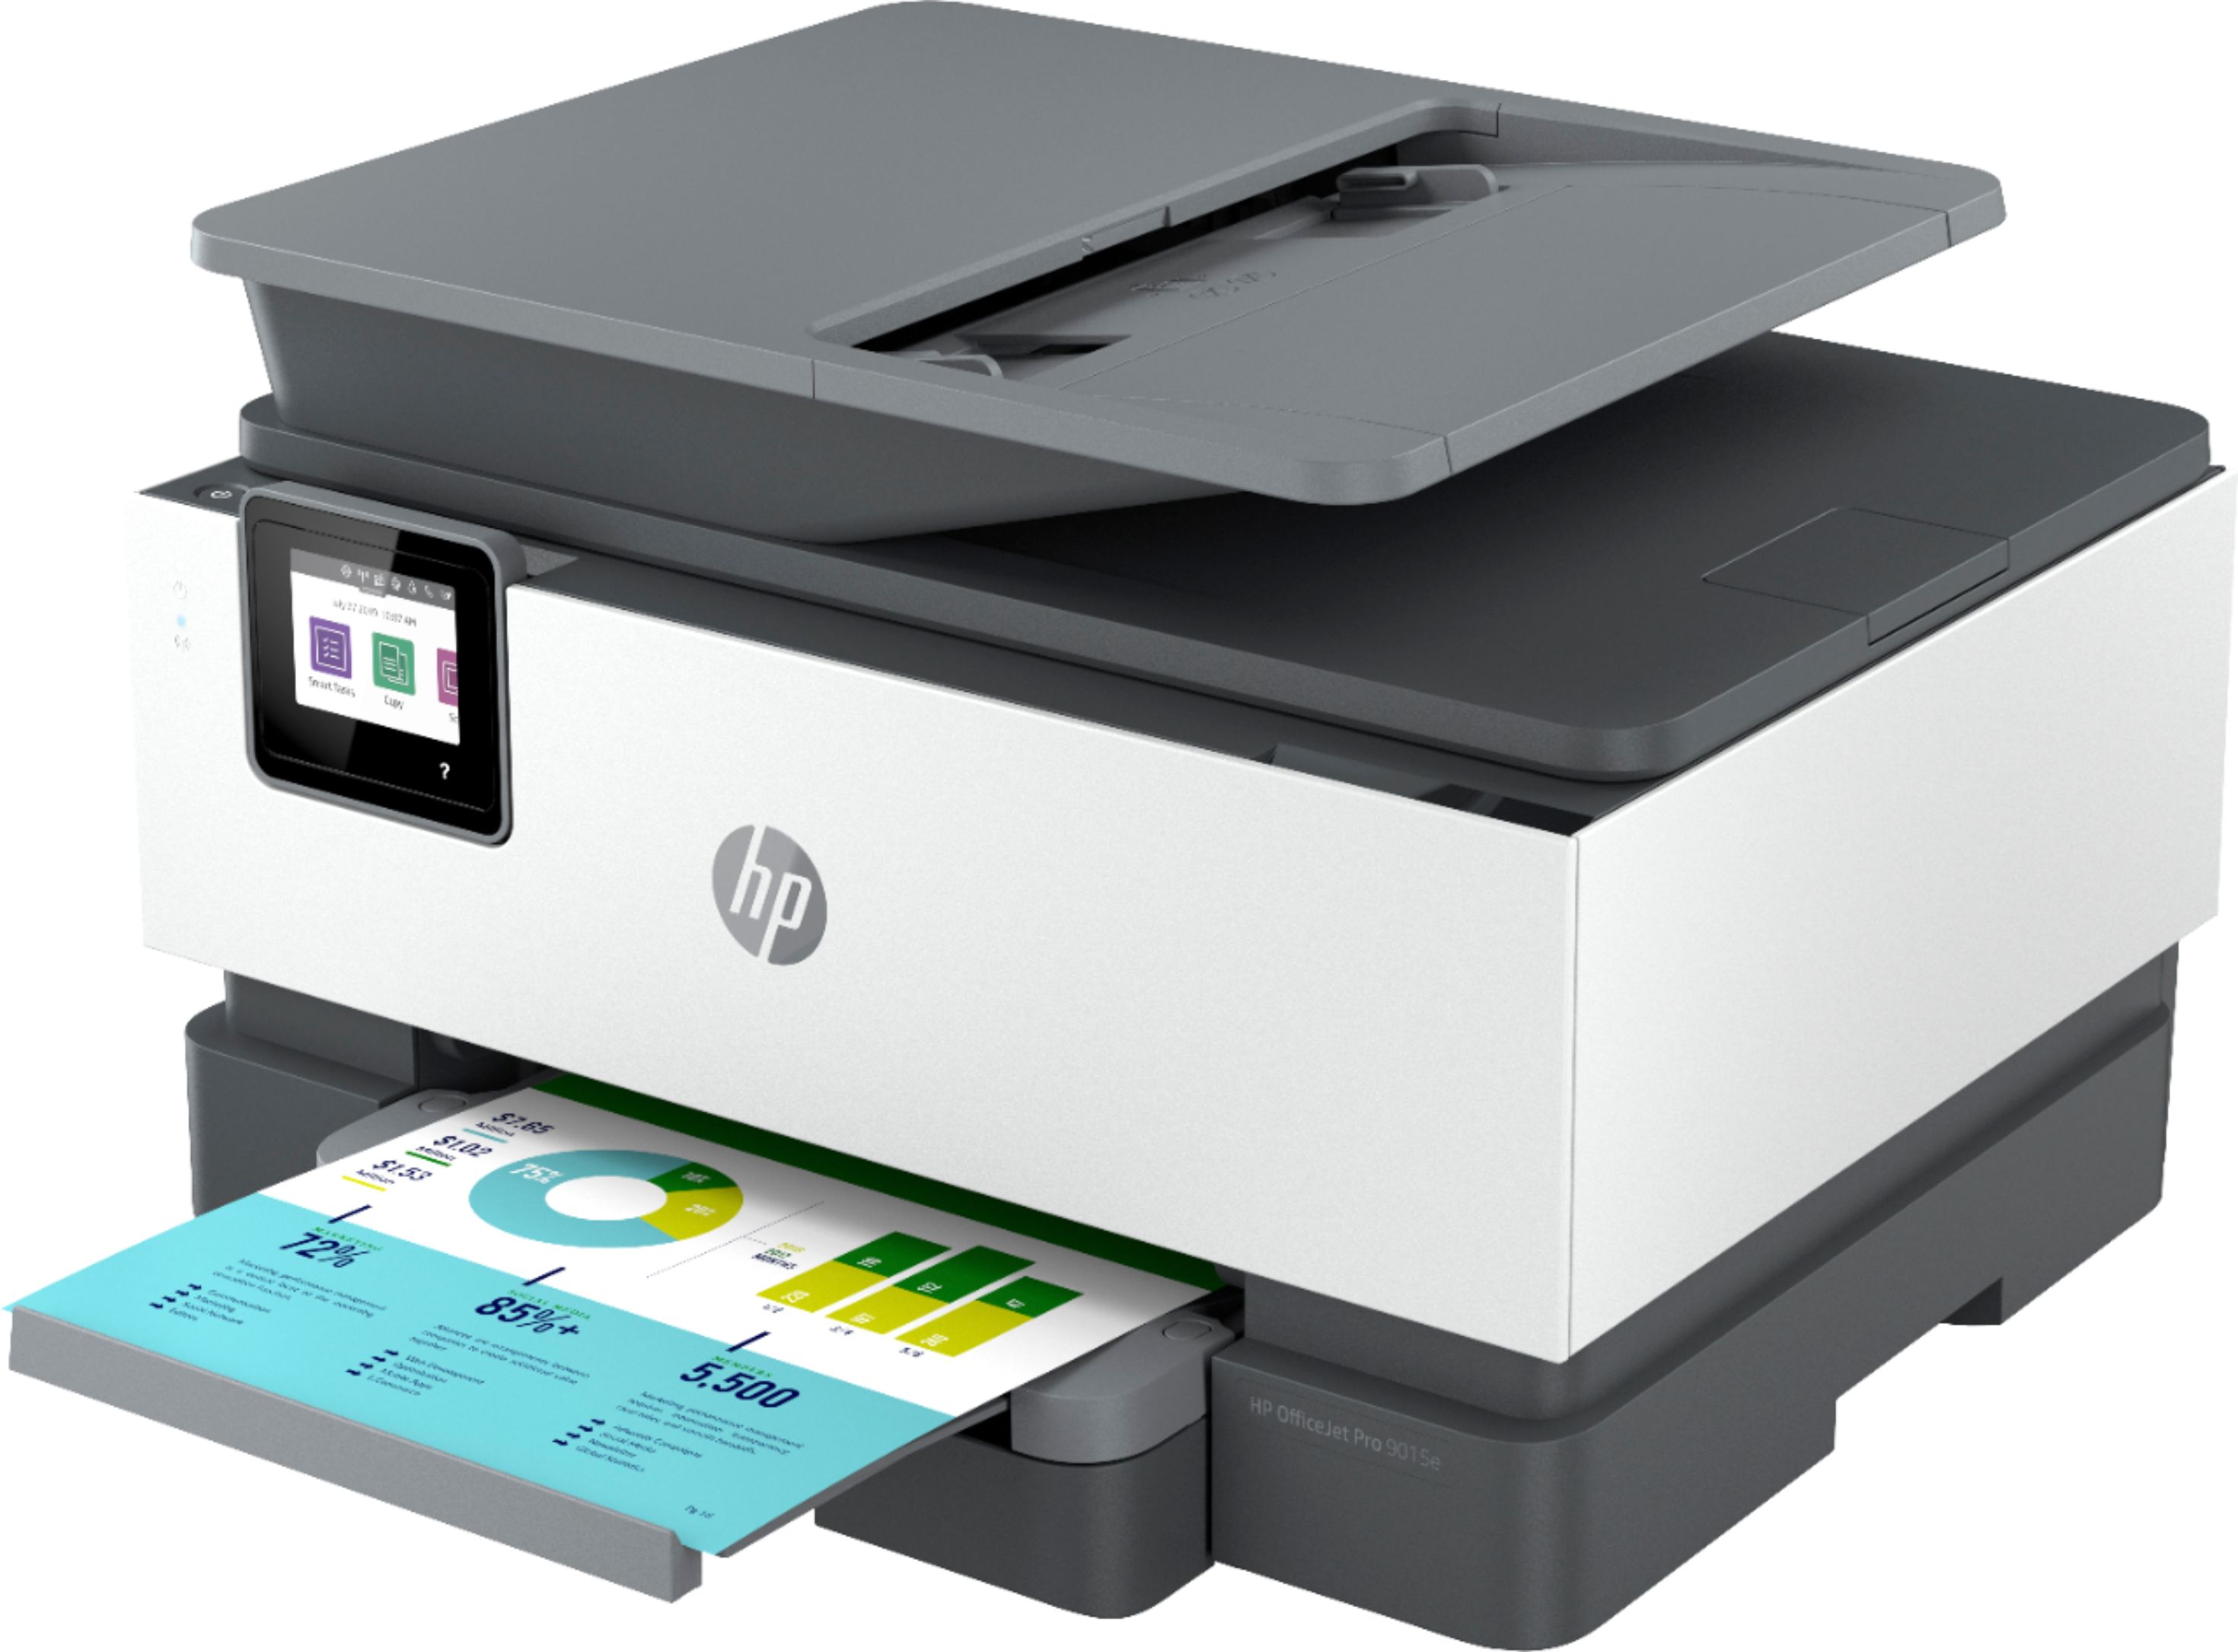 Angle View: HP - OfficeJet Pro 9015e Wireless All-In-One Inkjet Printer with 6 months of Instant Ink Included with HP+ - White